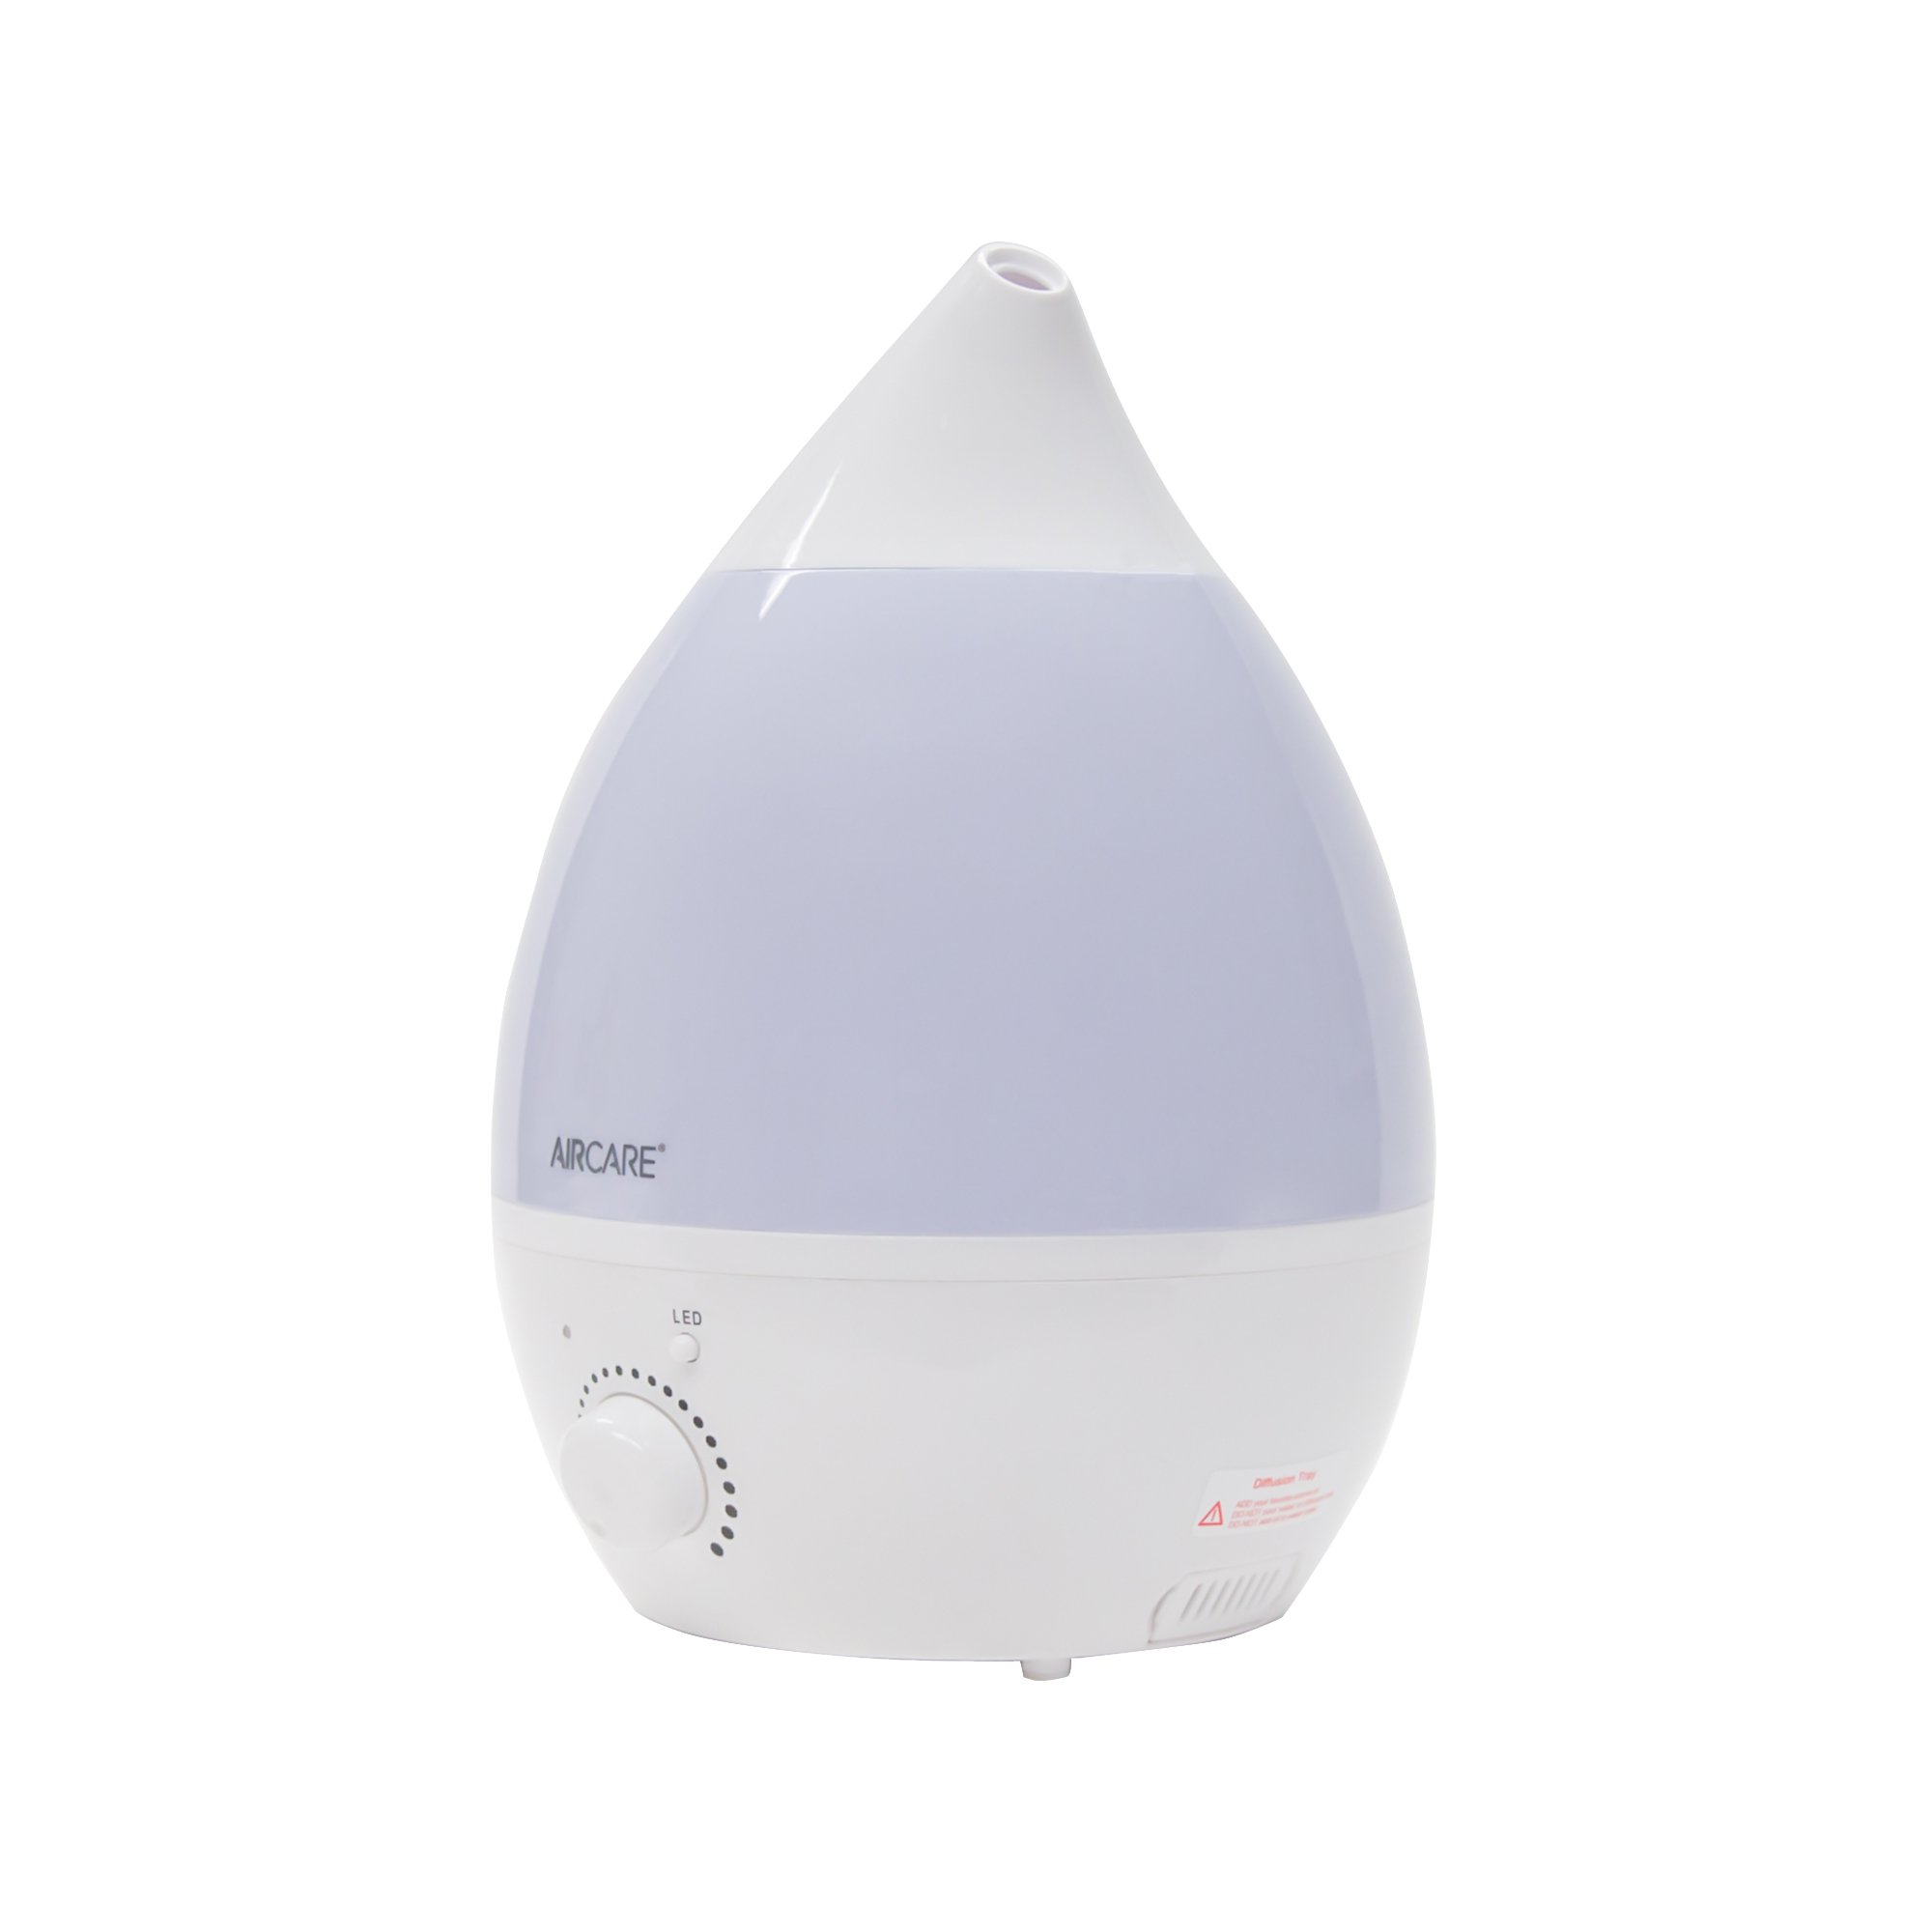 AIRCARE AUV10AWHT Aurora Mini Ultrasonic Humidifier with Aroma Diffuser and Multicolor LED Night Light, White - image 3 of 9